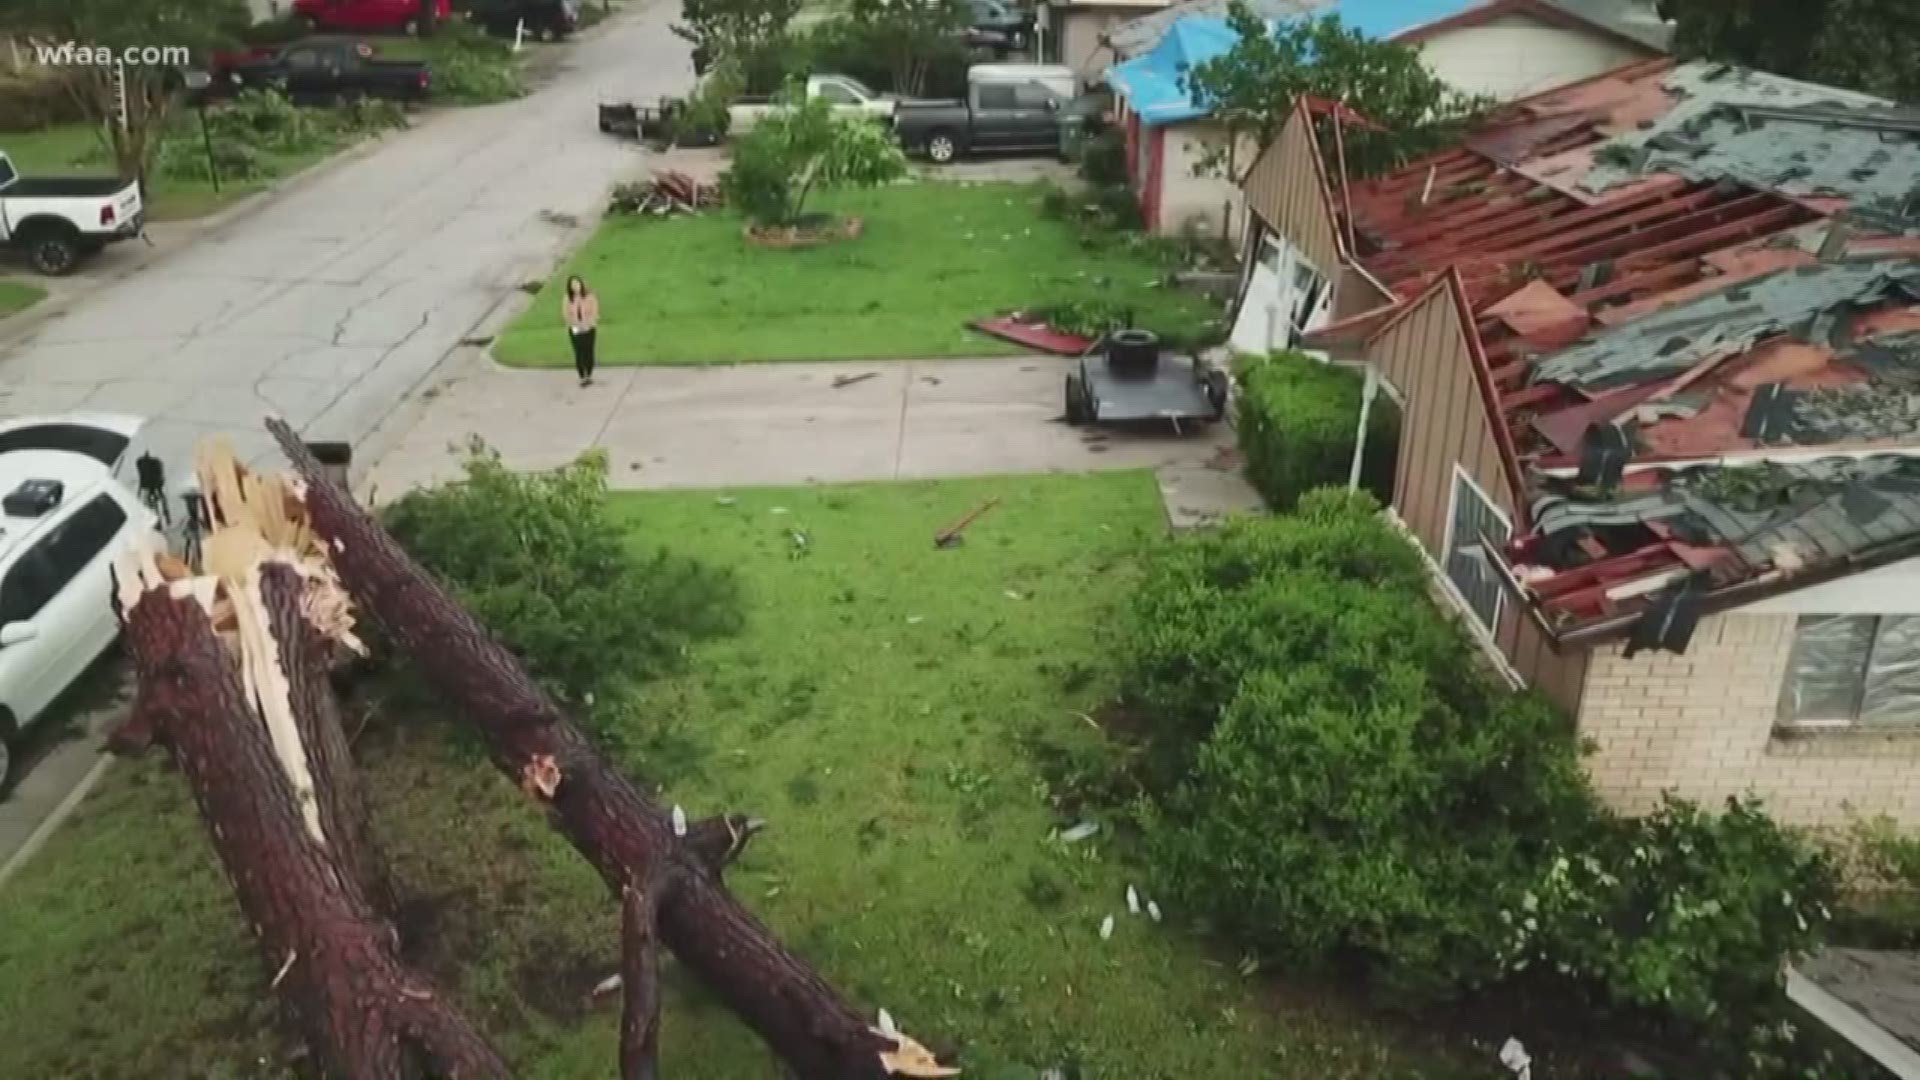 For the second Monday in a row, North Texas residents are cleaning up debris and destruction after severe storms blew through the area Sunday.